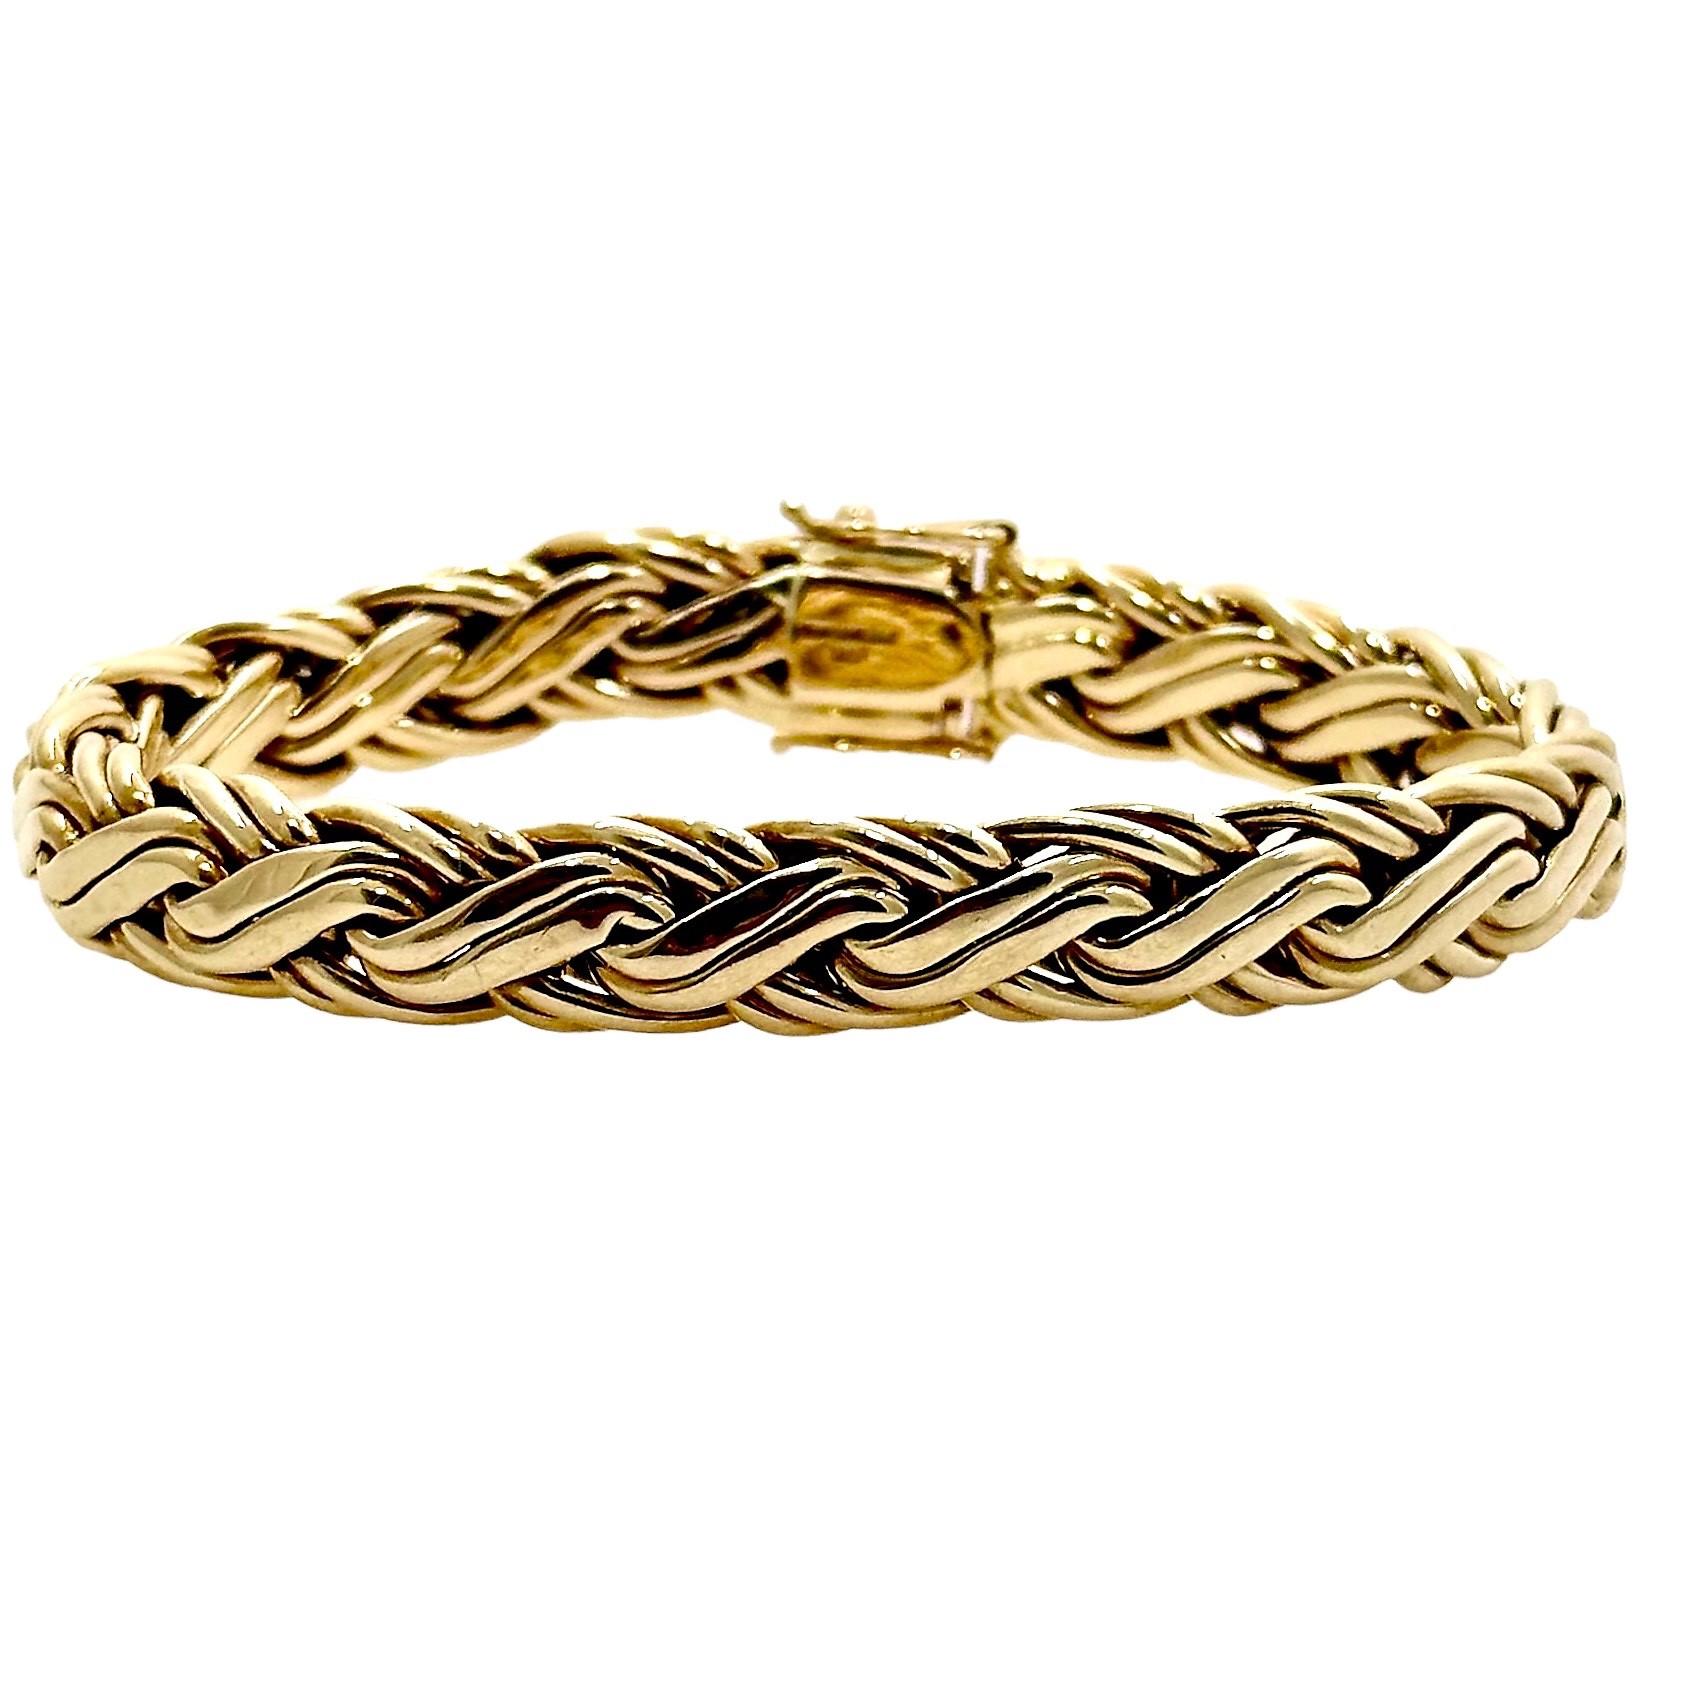 This well crafted, high polish finish, Tiffany & Co. braided wheat link bracelet would be a wonderful addition to any casual jewelry wardrobe. It measures 7 3/8 inches in length by 3/8 inches in width. The box clasp closed tightly, and  there are